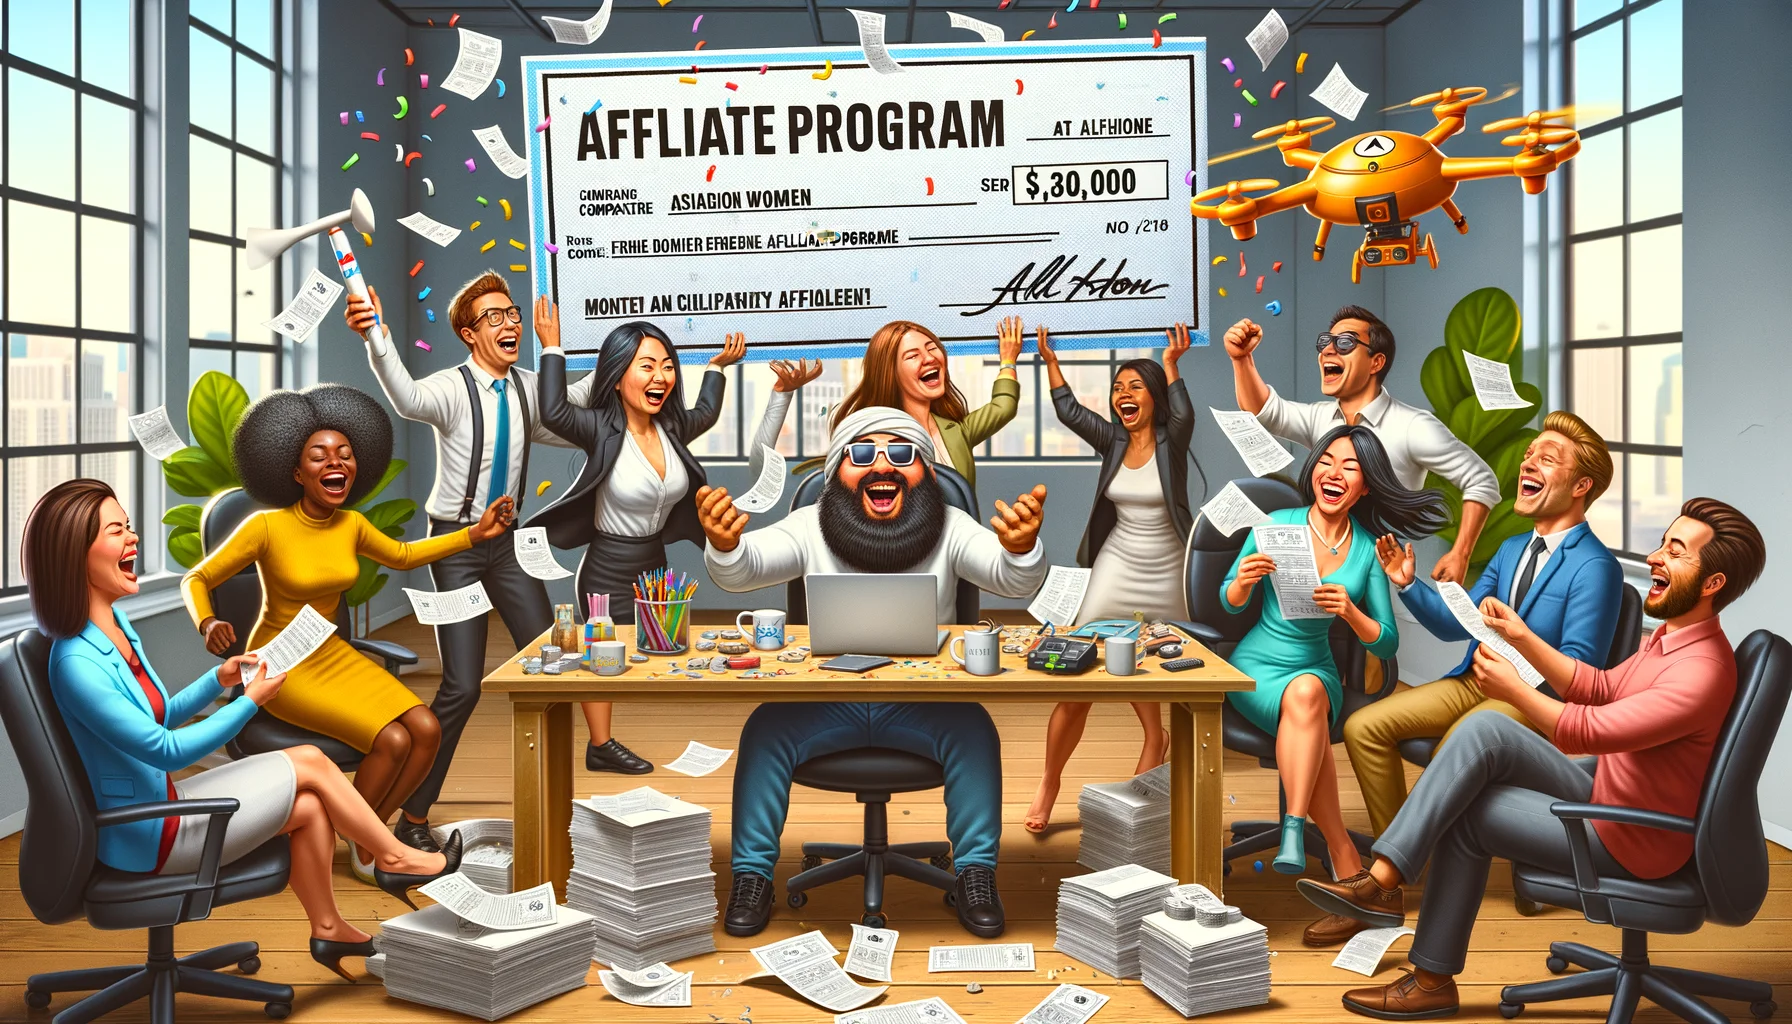 Create an image that humorously depicts the Affiliate Program of a fictional company named Temu. Set the scene in a charmingly absurd office environment where people of all genders and descents are laughing and engaging in comedic antics. Maybe there's an Asian woman presenting a huge, oversized novelty affiliate check, a Middle-Eastern man barely able to handle a pile of paperwork that's about to burst into confetti, a Black woman in an office chair race, and a white man trying to swat a drone carrying a banner about the affiliate program. Make sure the atmosphere is light-hearted, exuding positive energy and mirth.